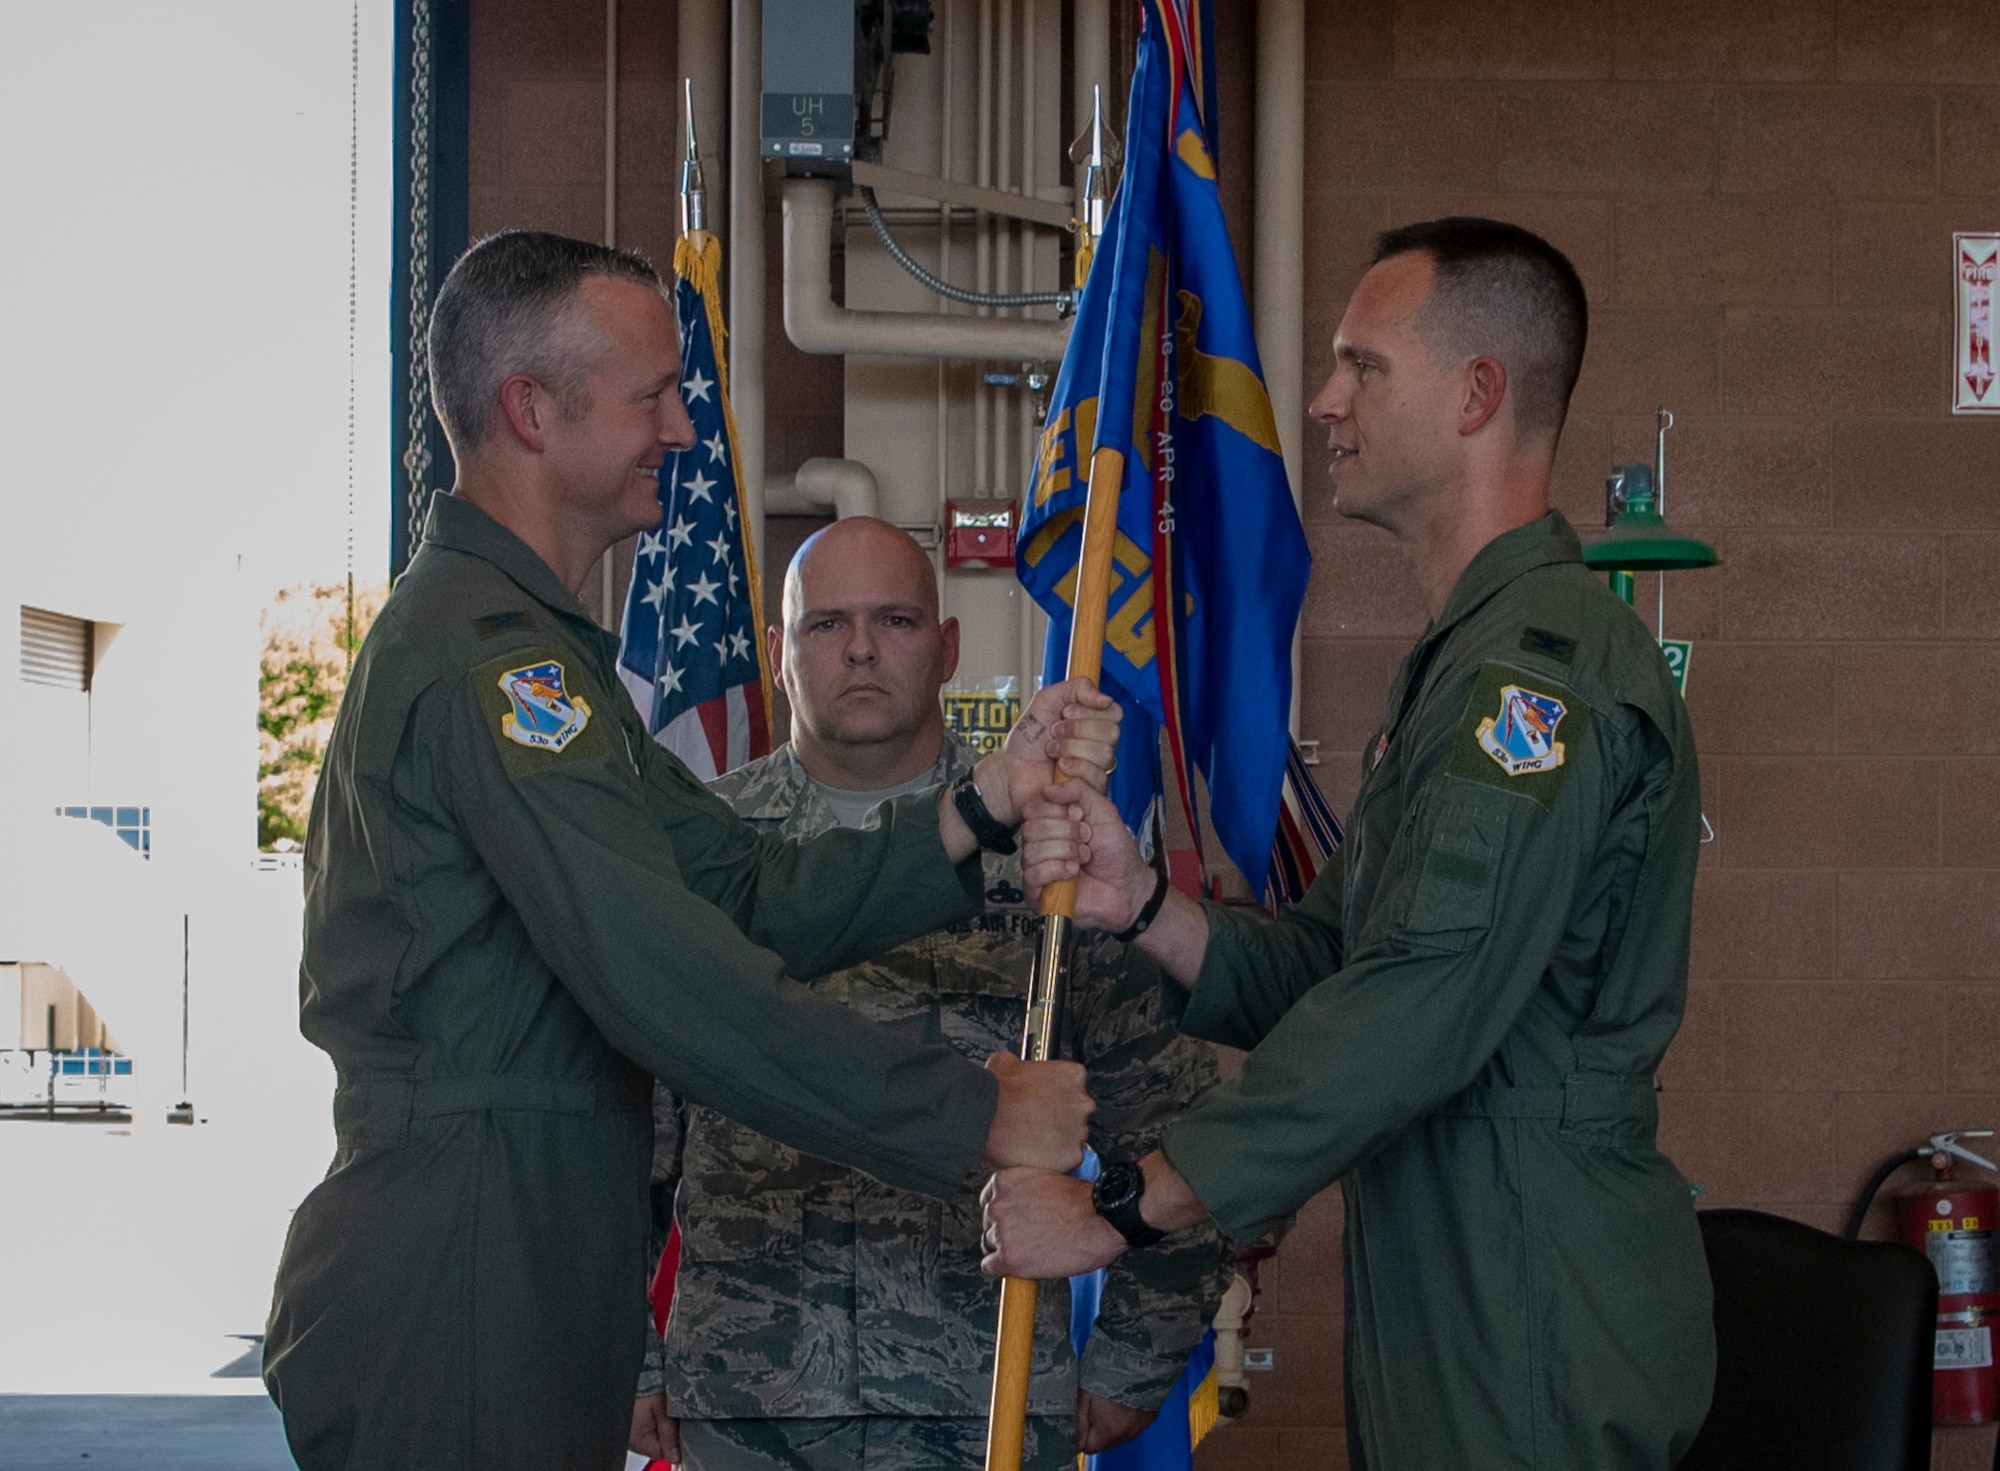 An Airman passes a guidon to another Airman.